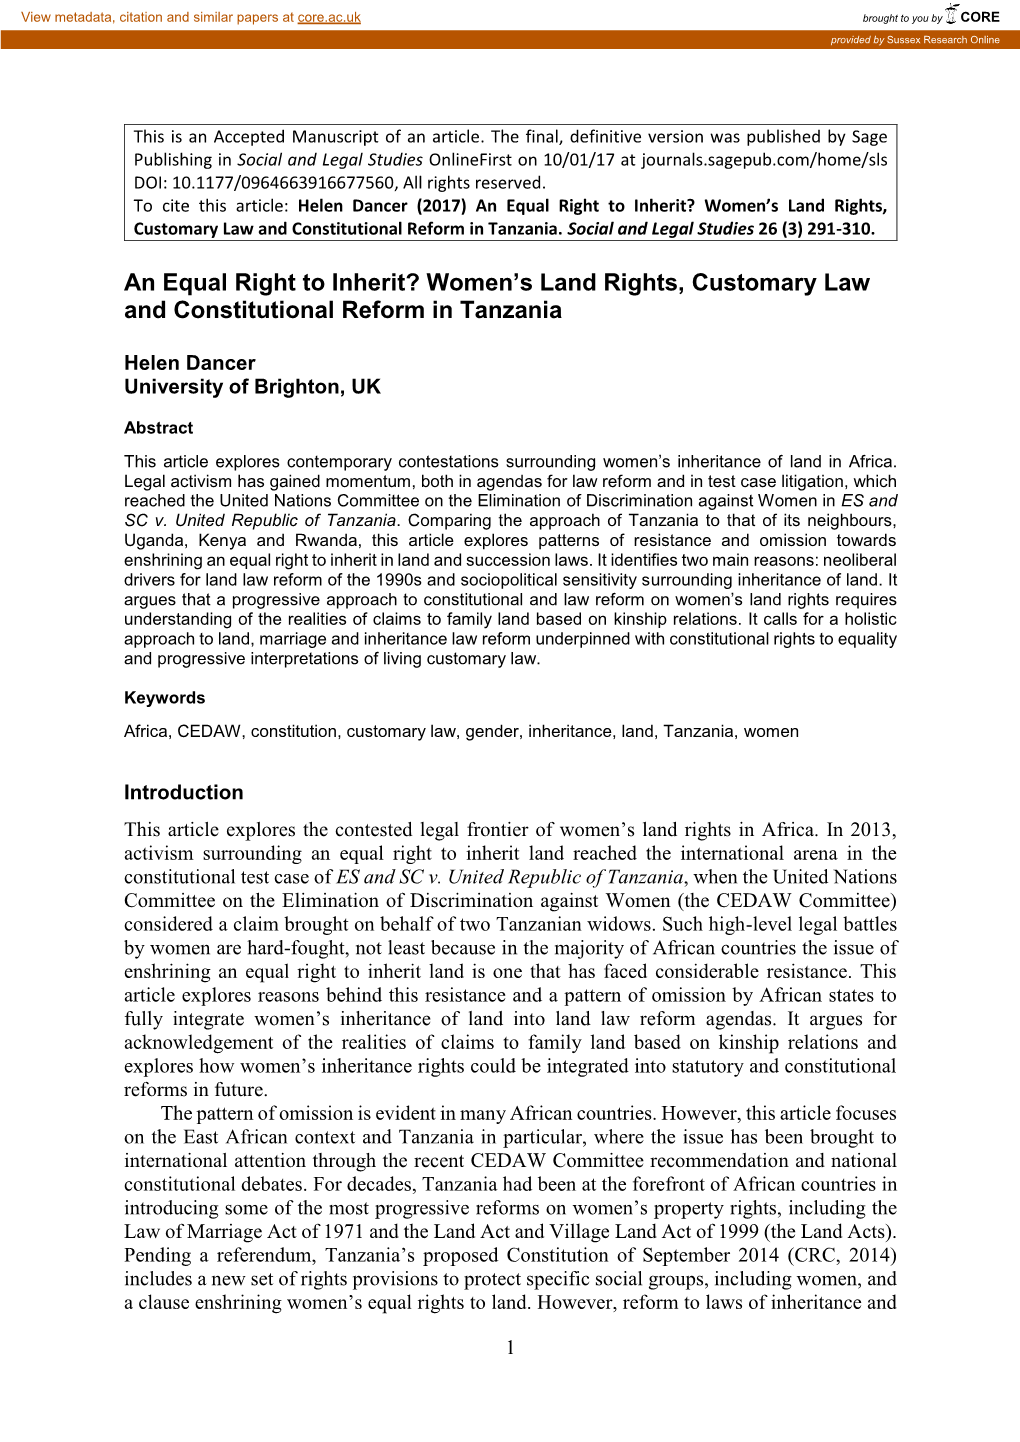 Women's Land Rights, Customary Law and Constitutional